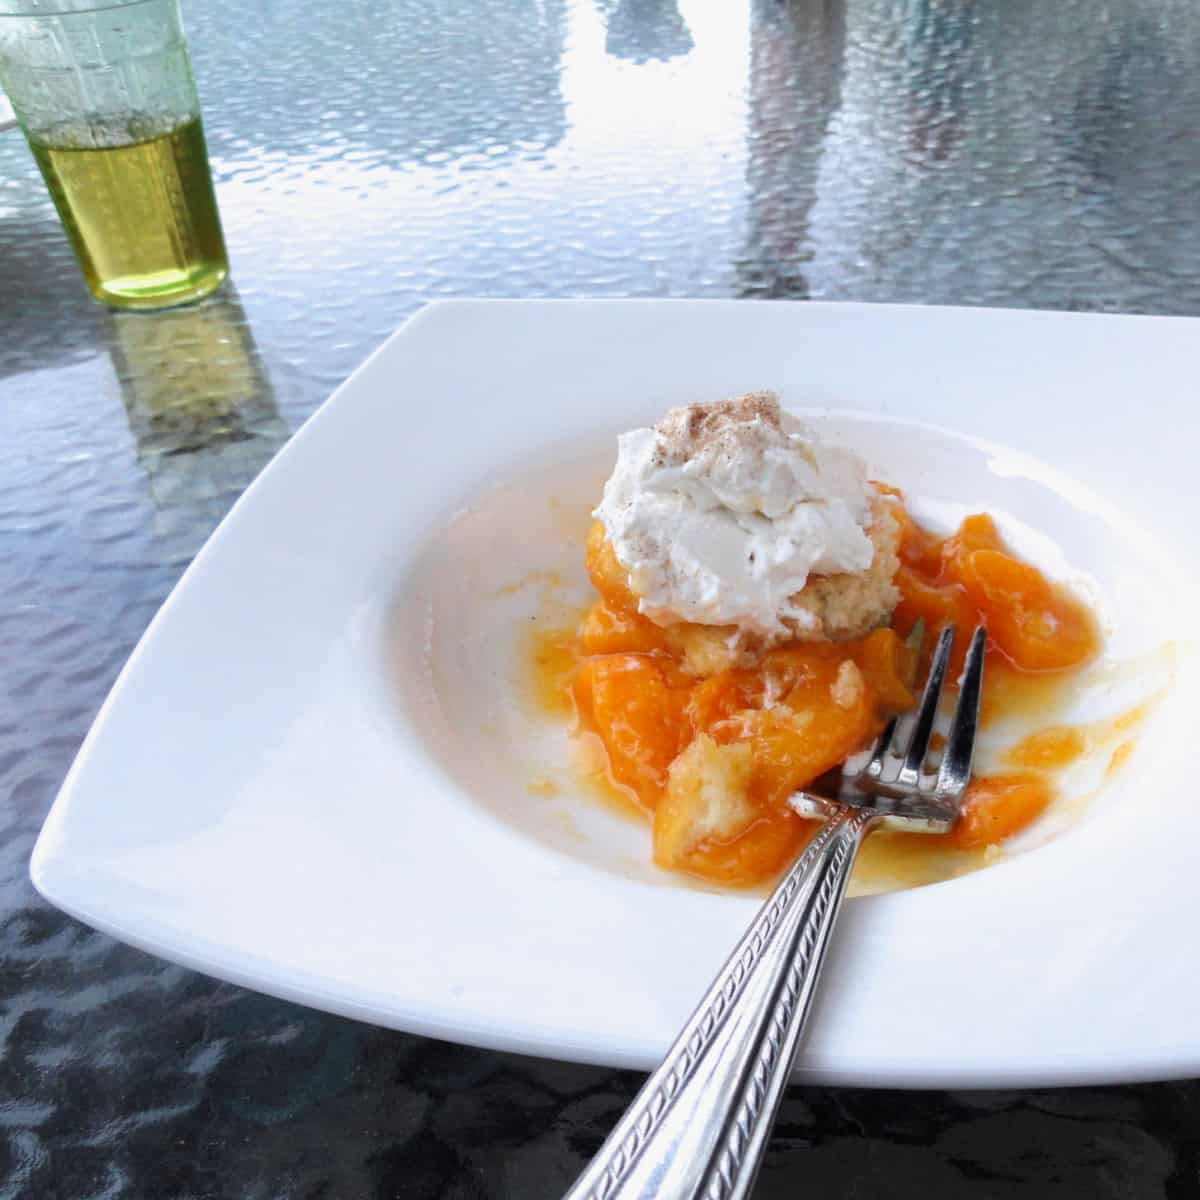 Peach cobbler being served in a small white bowl with whipped cream.